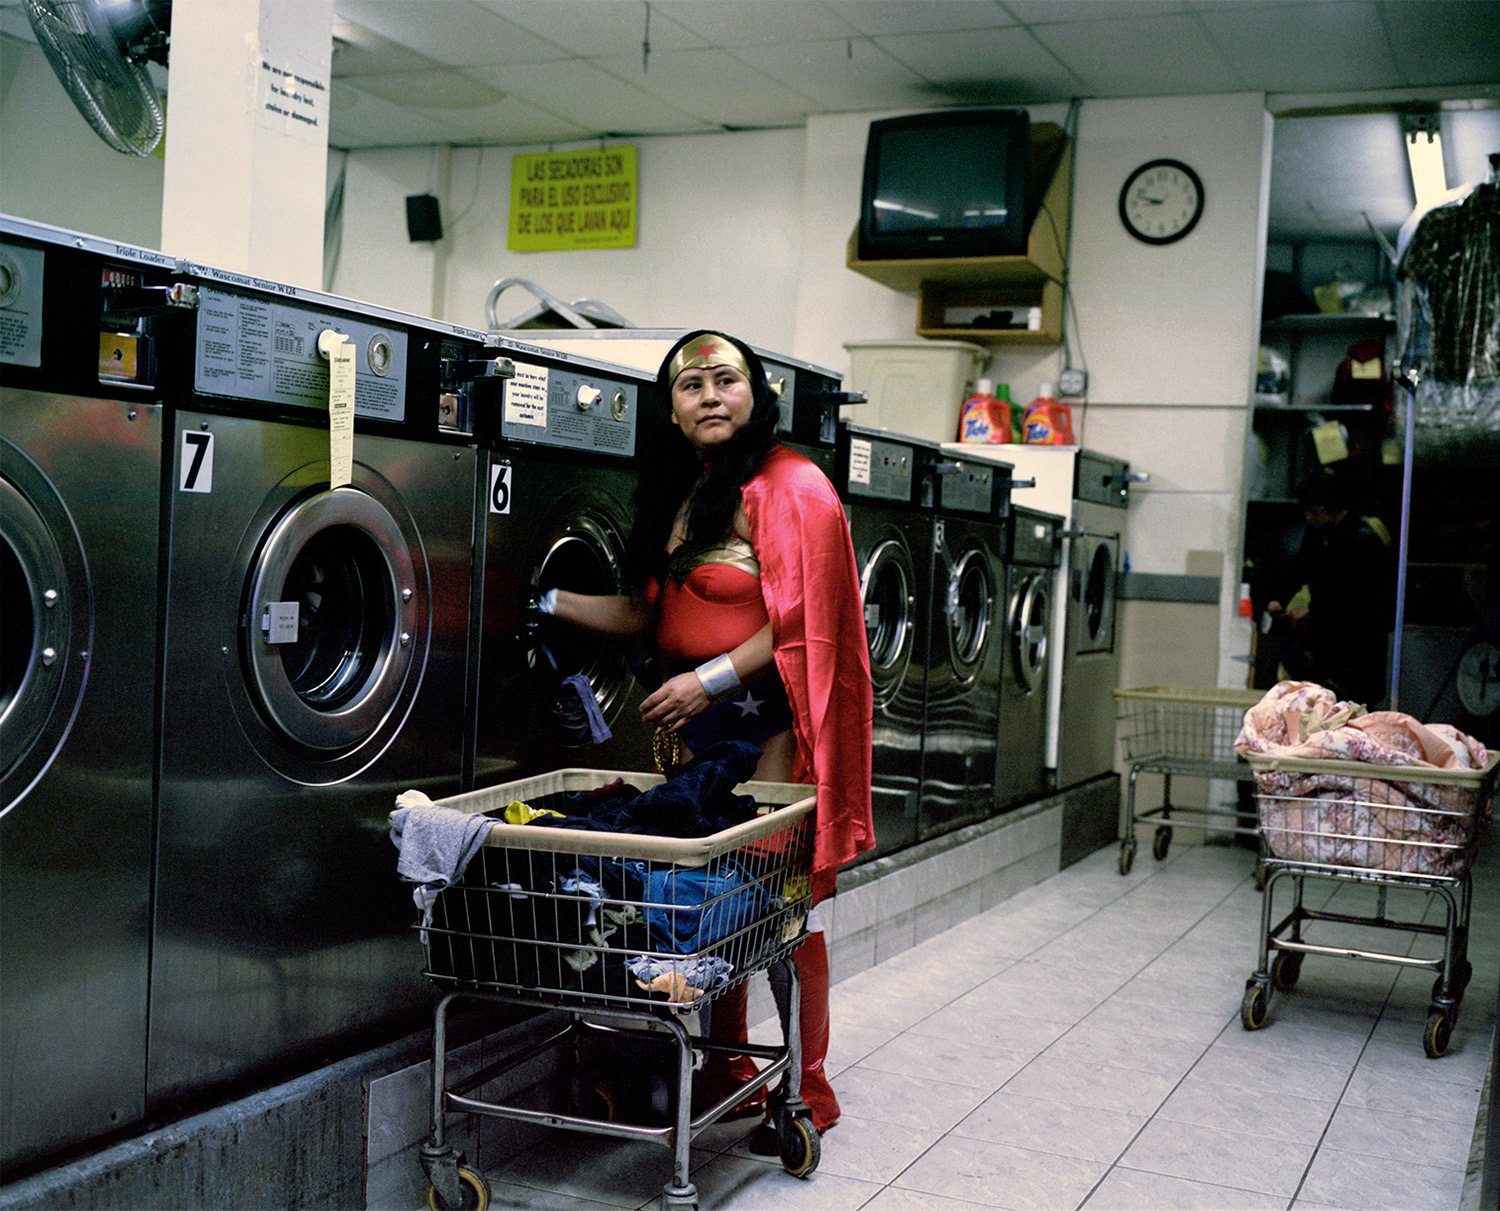 Wonder woman is  Maria Luisa Romero from the State of Puebla works in a Laundromat in Brooklyn New York she sends 150 dollars a week